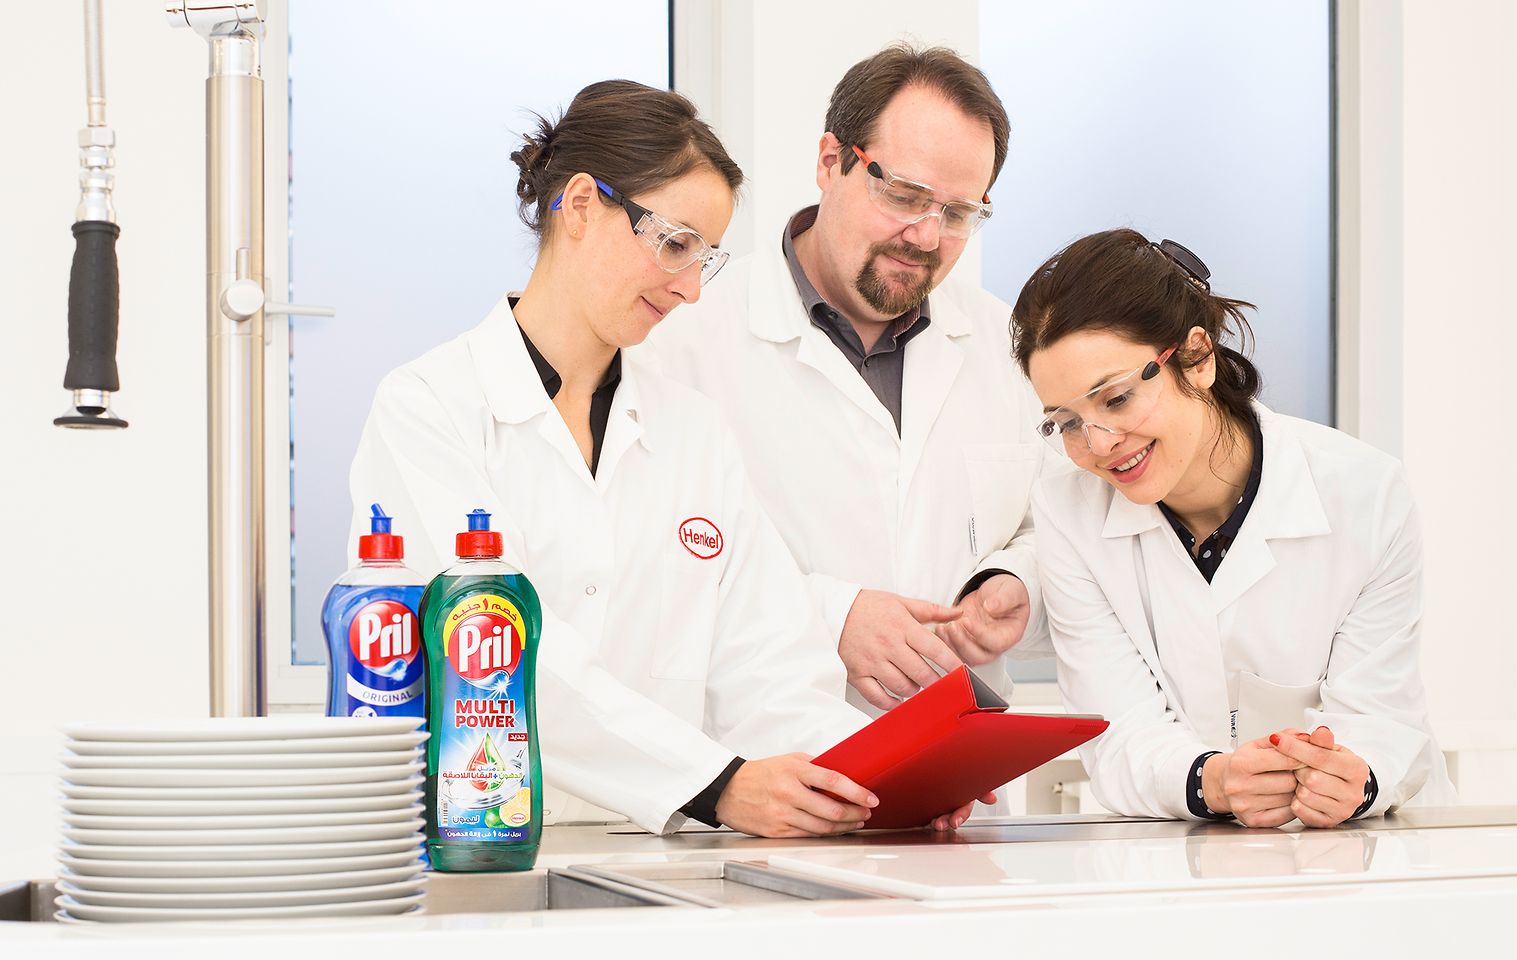 Three employees proving report in lab